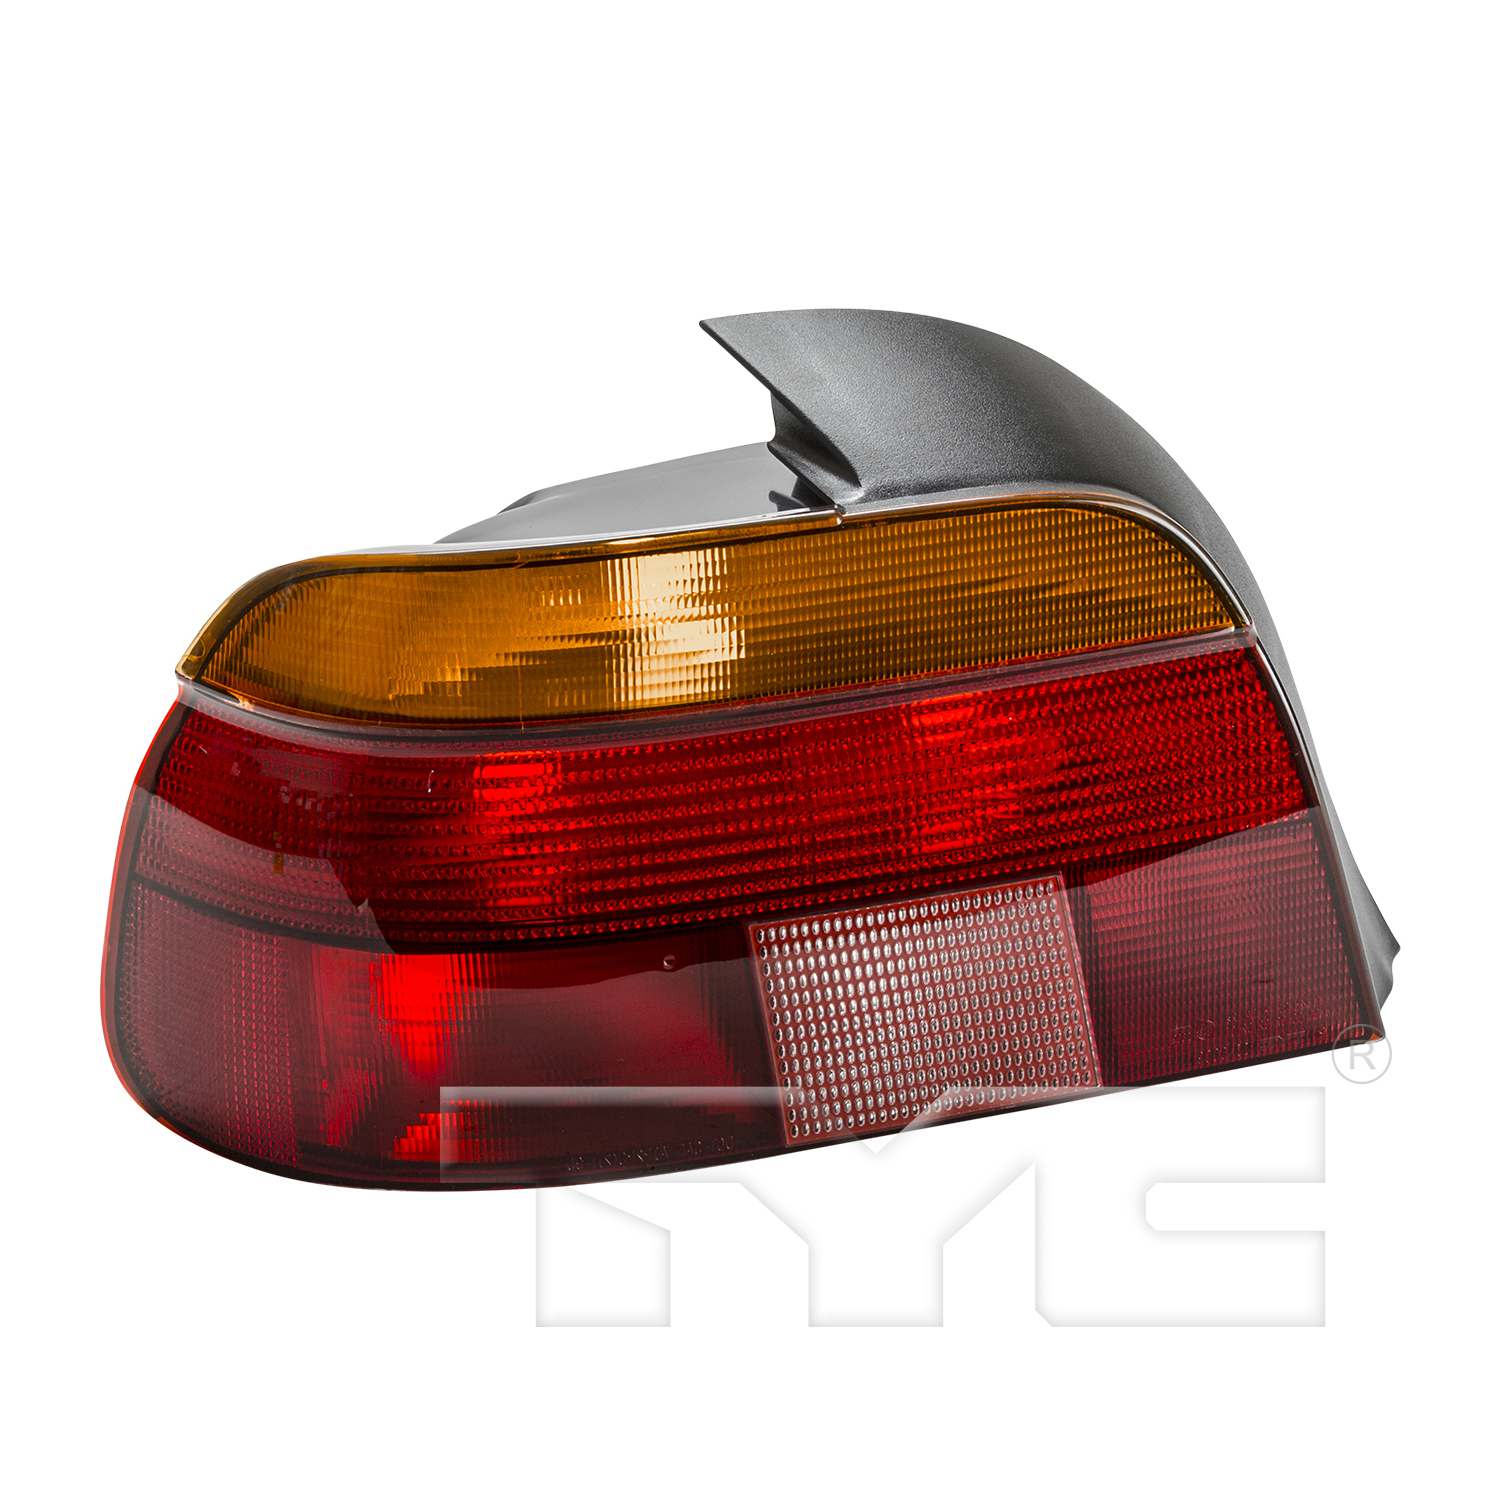 Aftermarket TAILLIGHTS for BMW - 540I, 540i,97-00,LT Taillamp assy